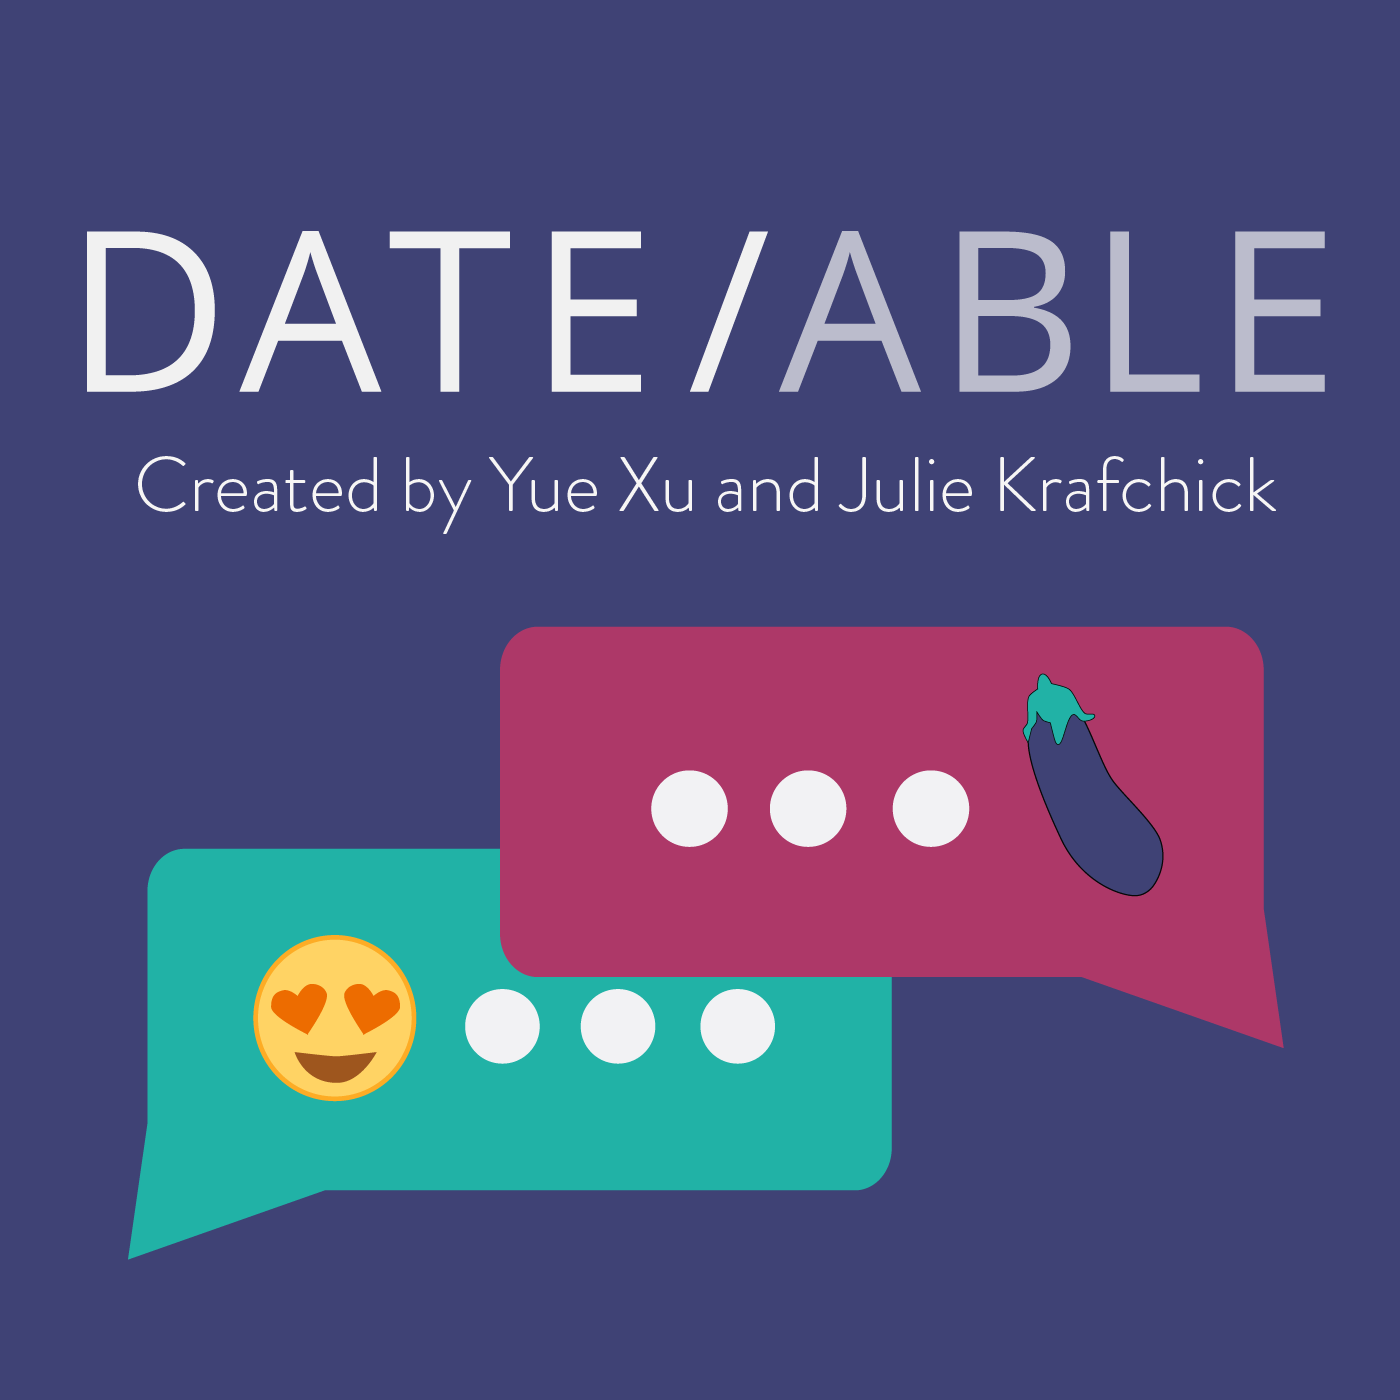 Fresh update on "eve" discussed on Dateable Podcast